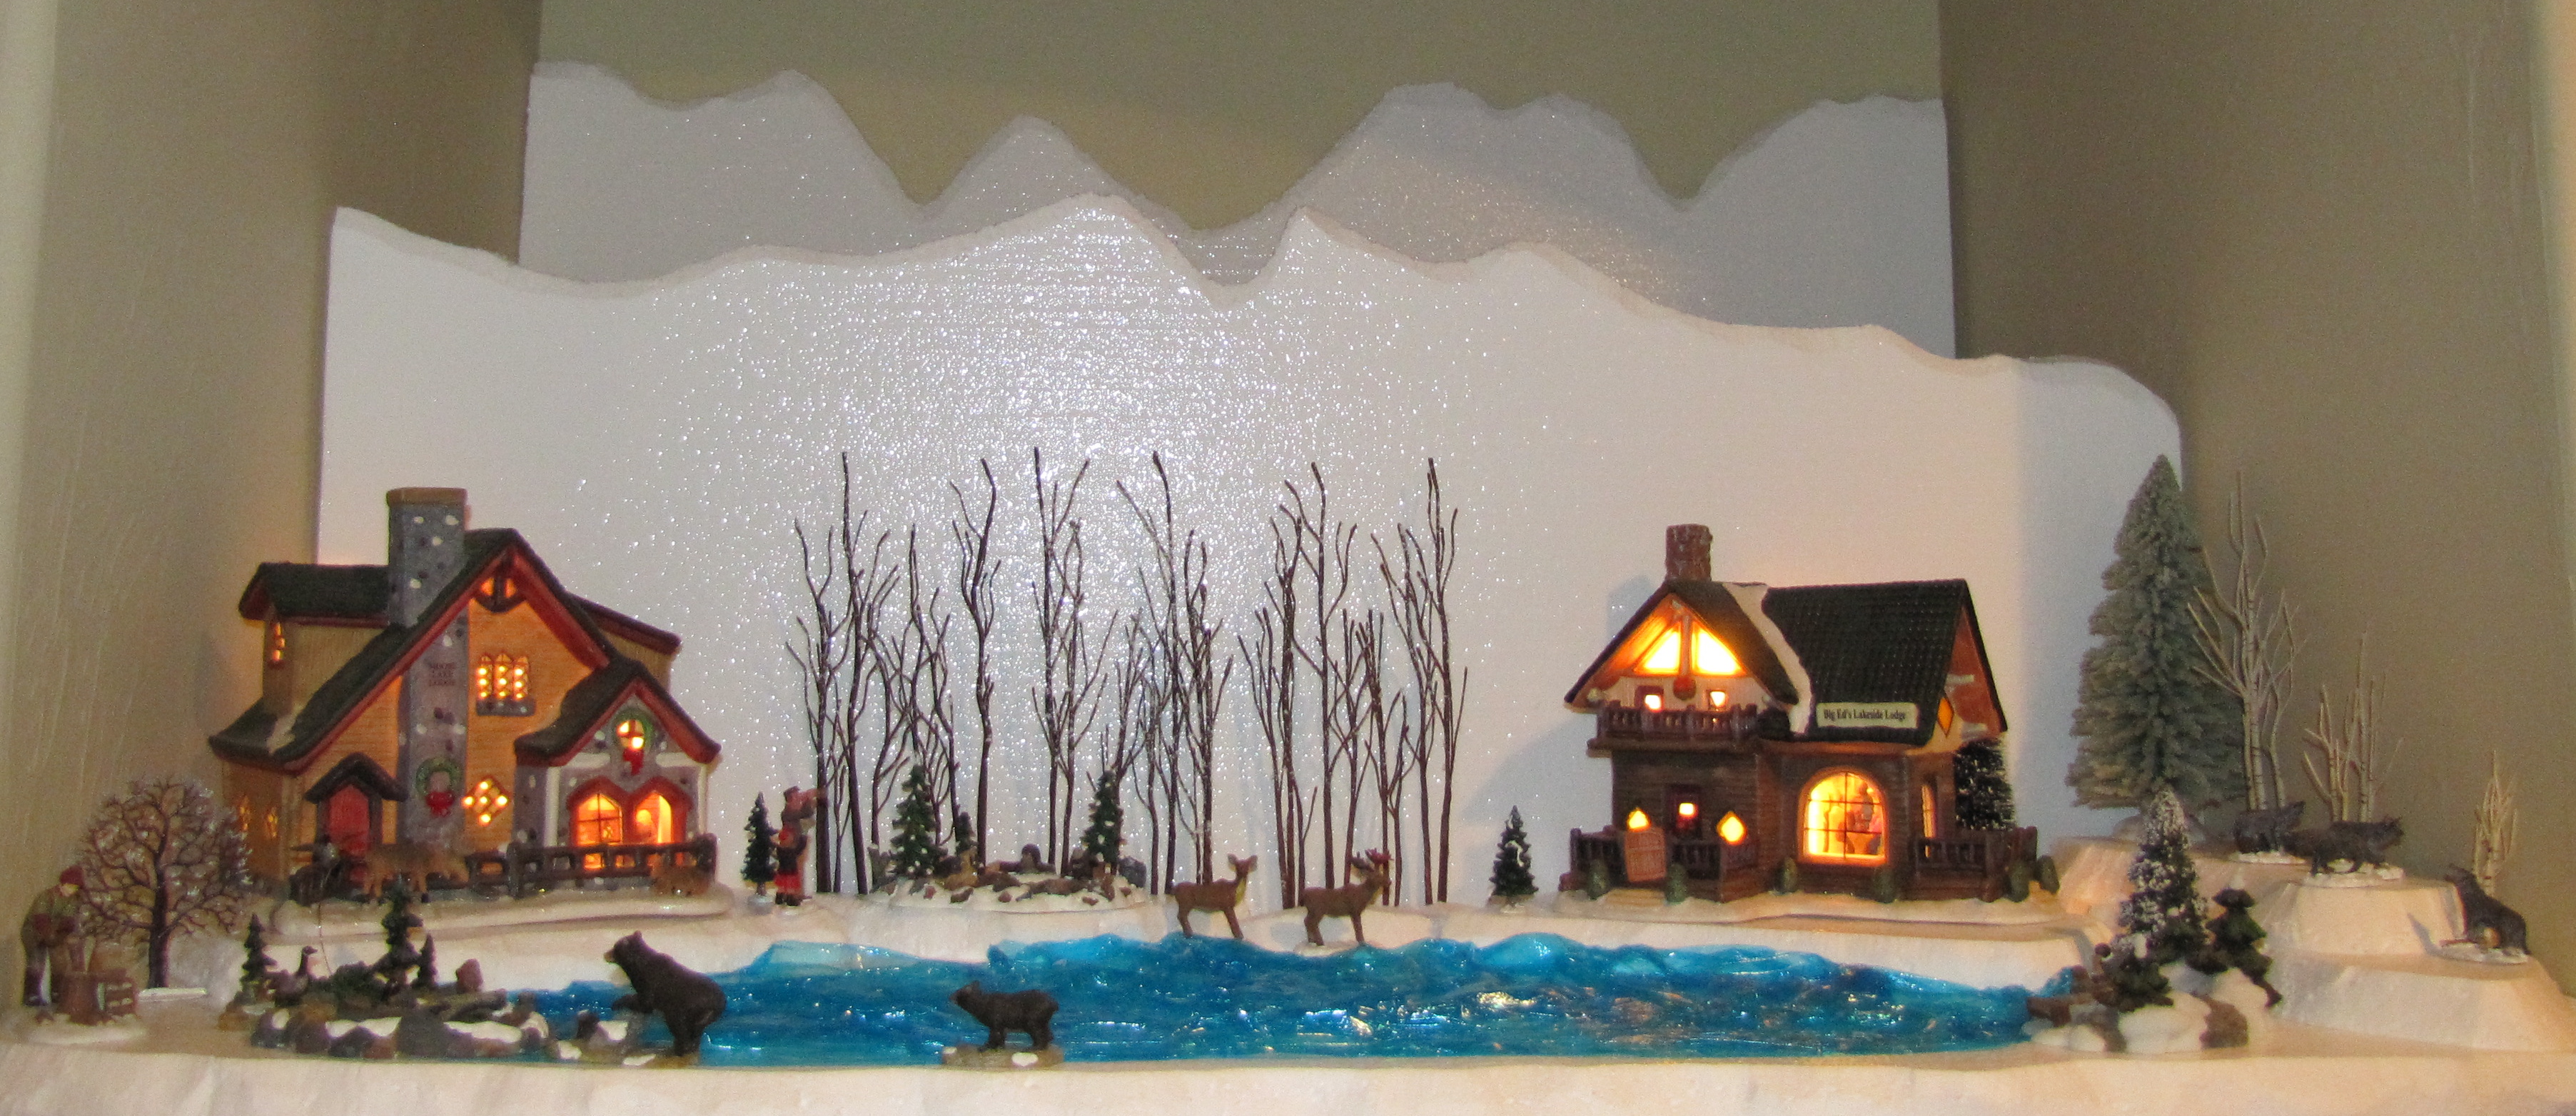 Displaying 19> Images For - Christmas Village Houses Display Ideas...